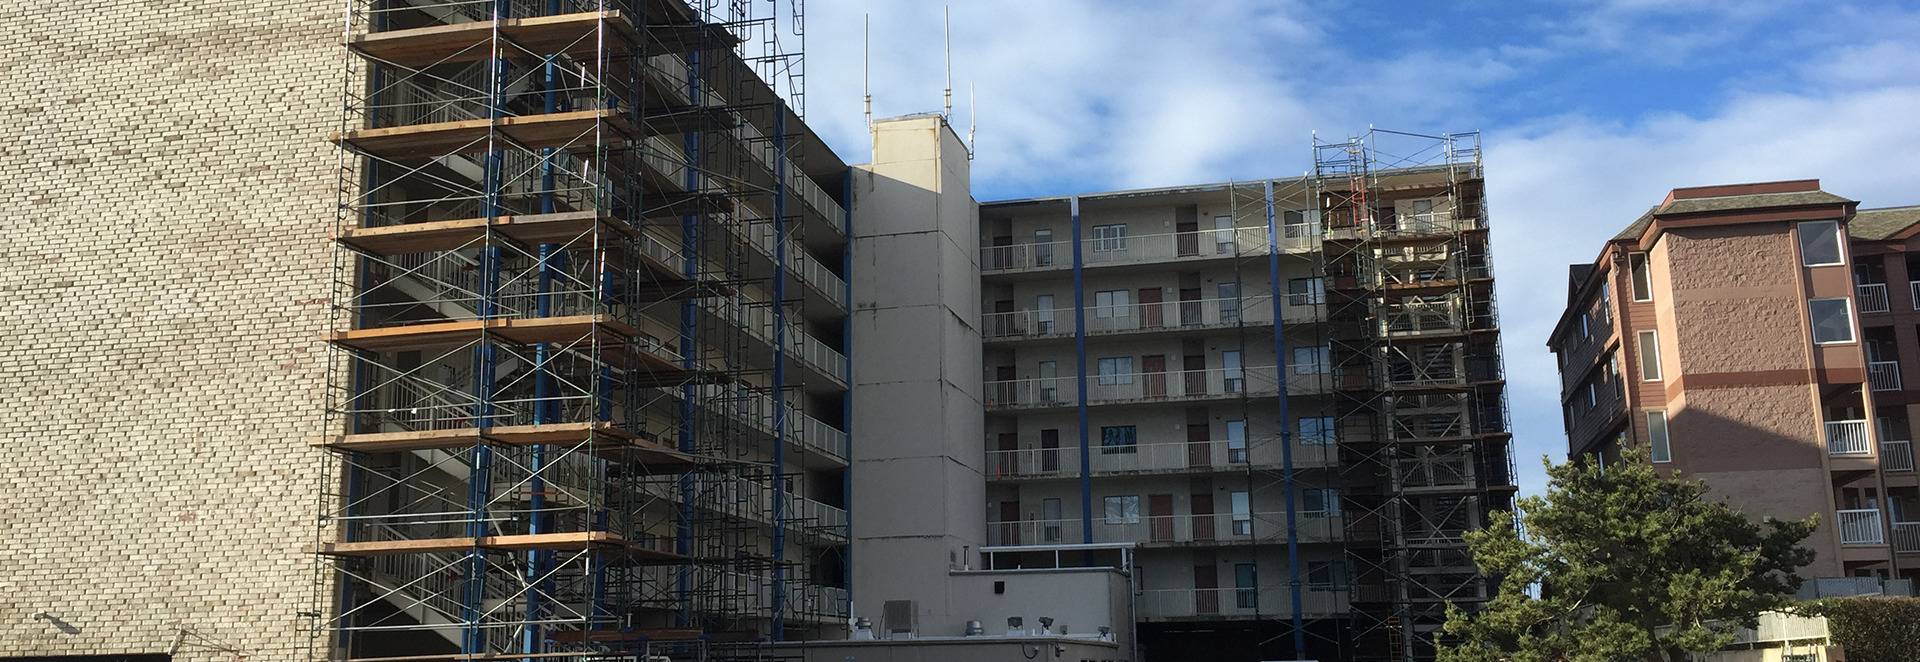 Commercial scaffolding installed on multistory apartment complex.